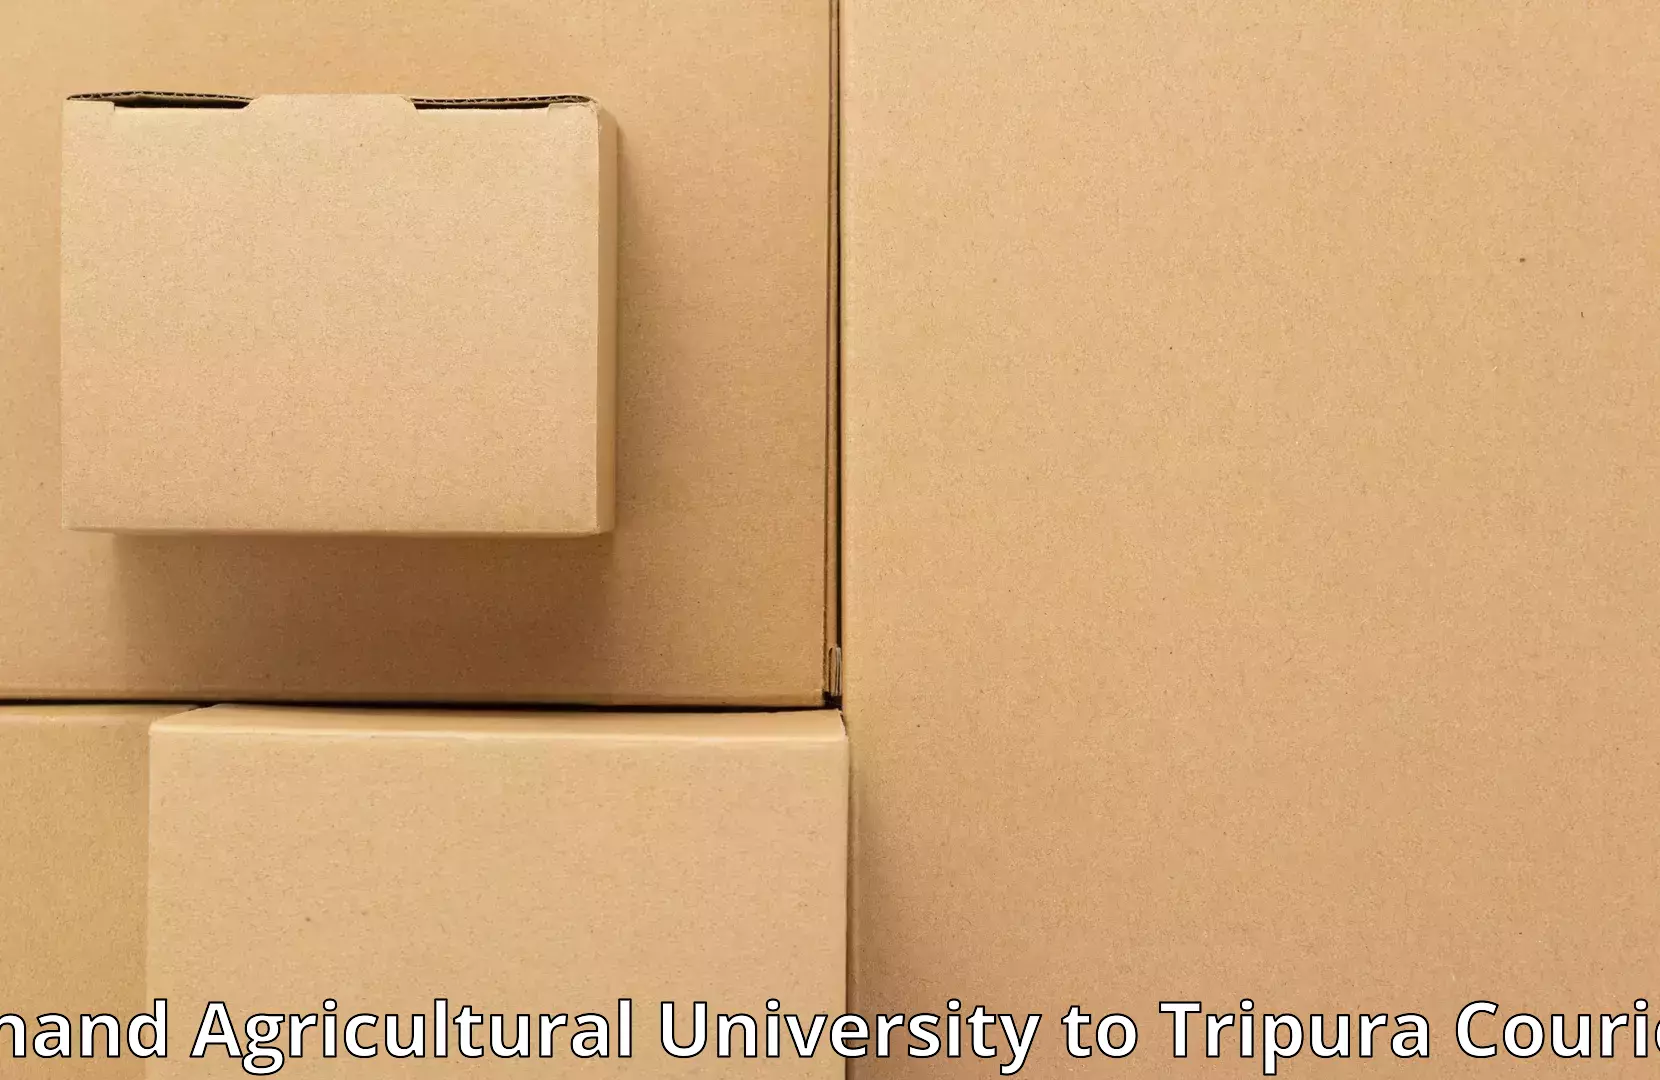 Furniture transport and logistics Anand Agricultural University to Dhalai